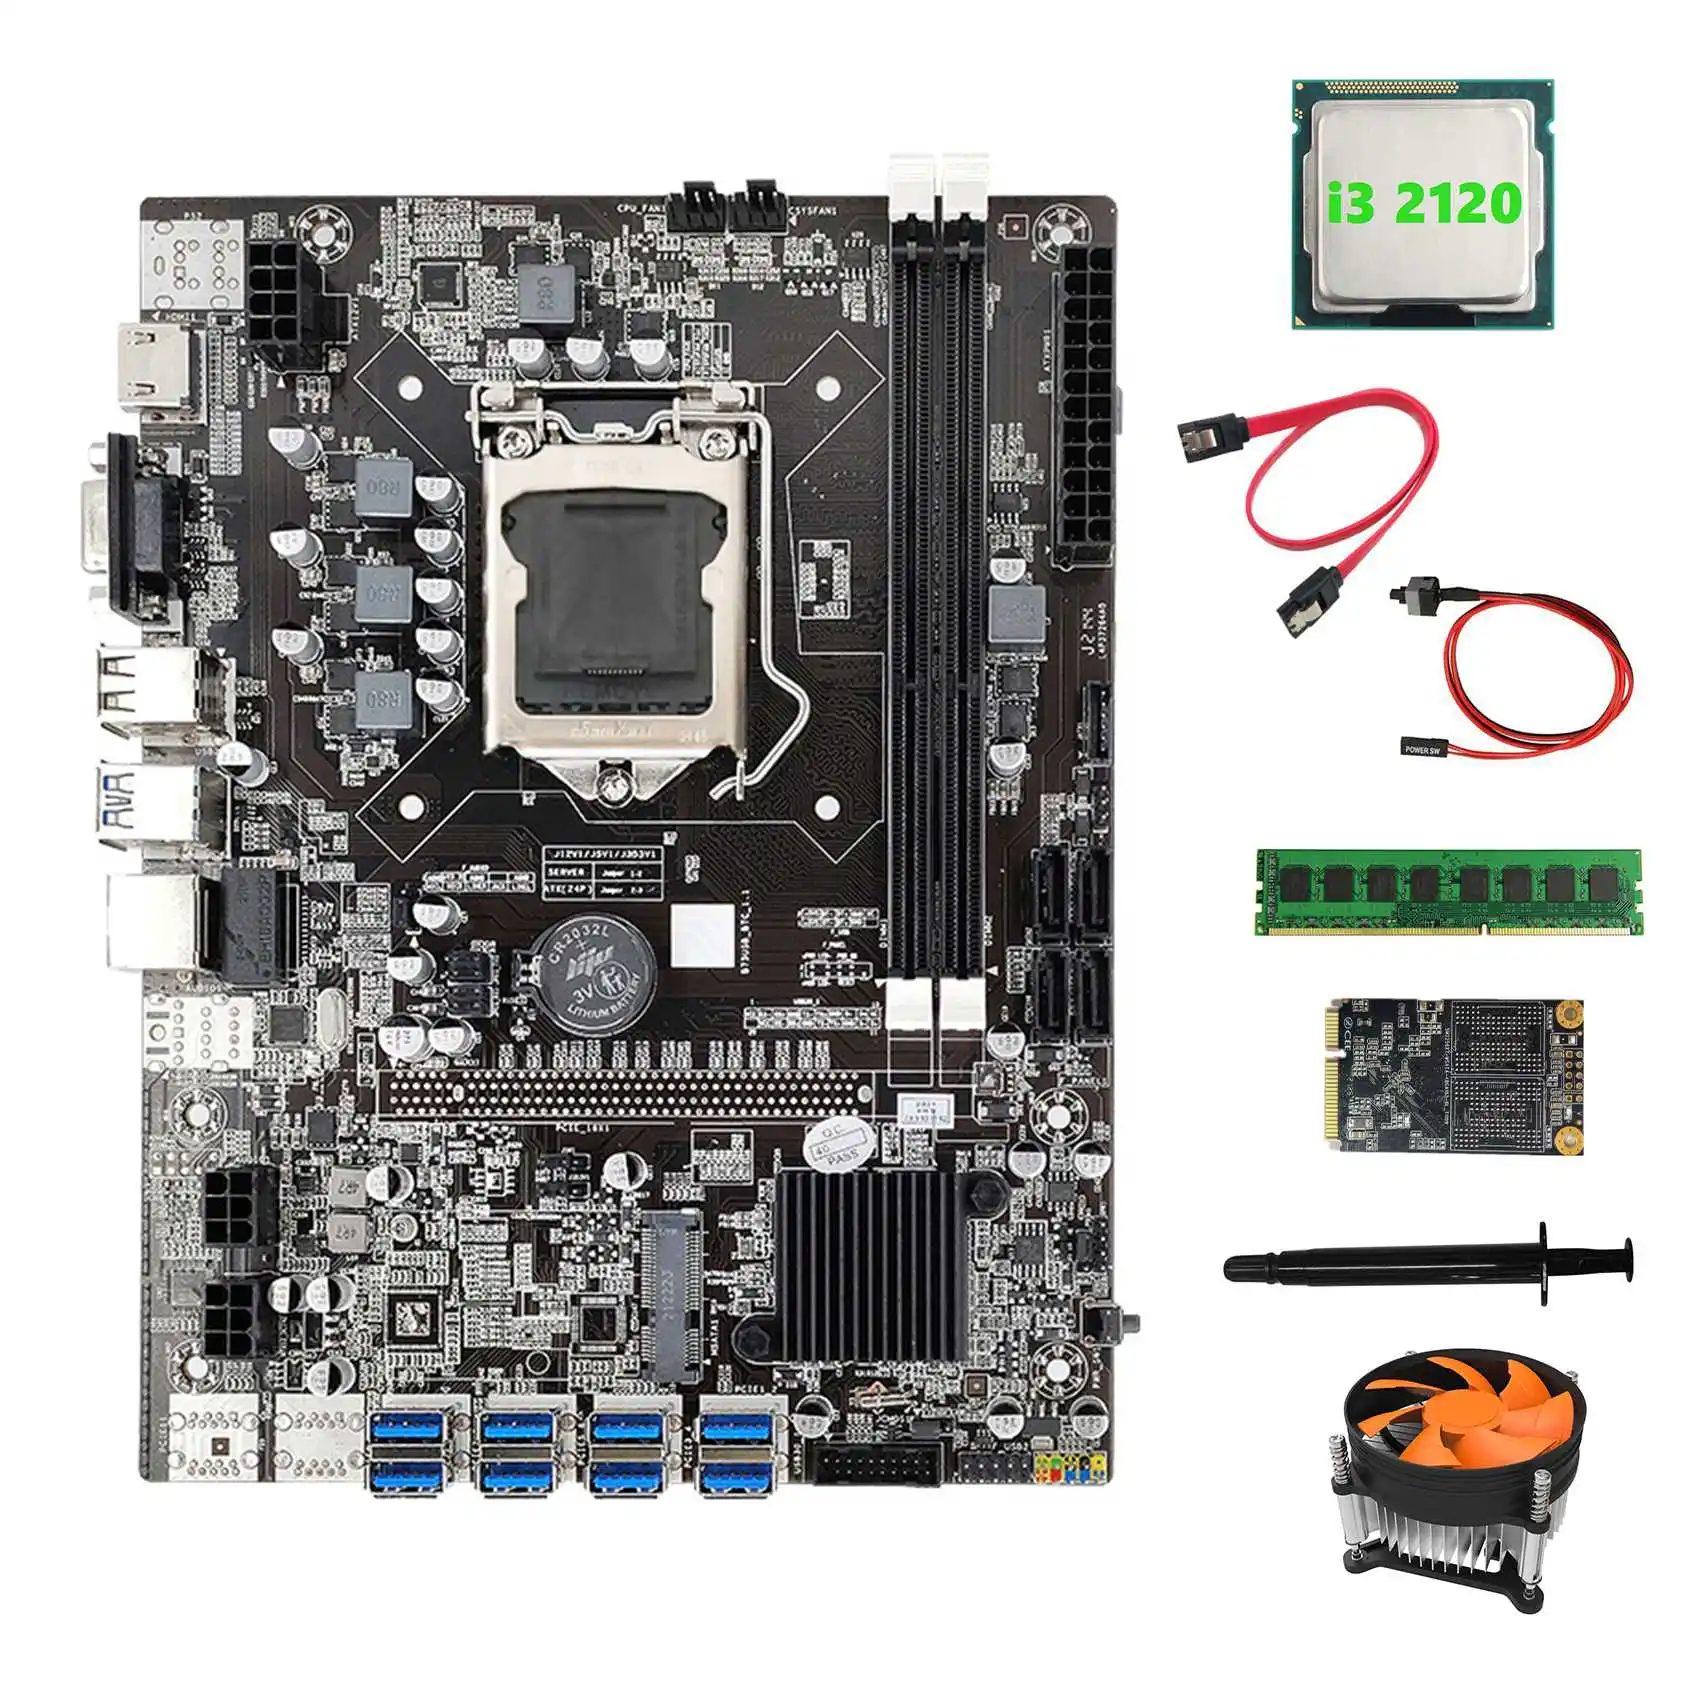 

B75 BTC Mining Motherboard 8XUSB3.0+I3 2120 CPU+DDR3 4GB RAM+128G SSD+Fan+SATA Cable+Switch Cable+Thermal Grease